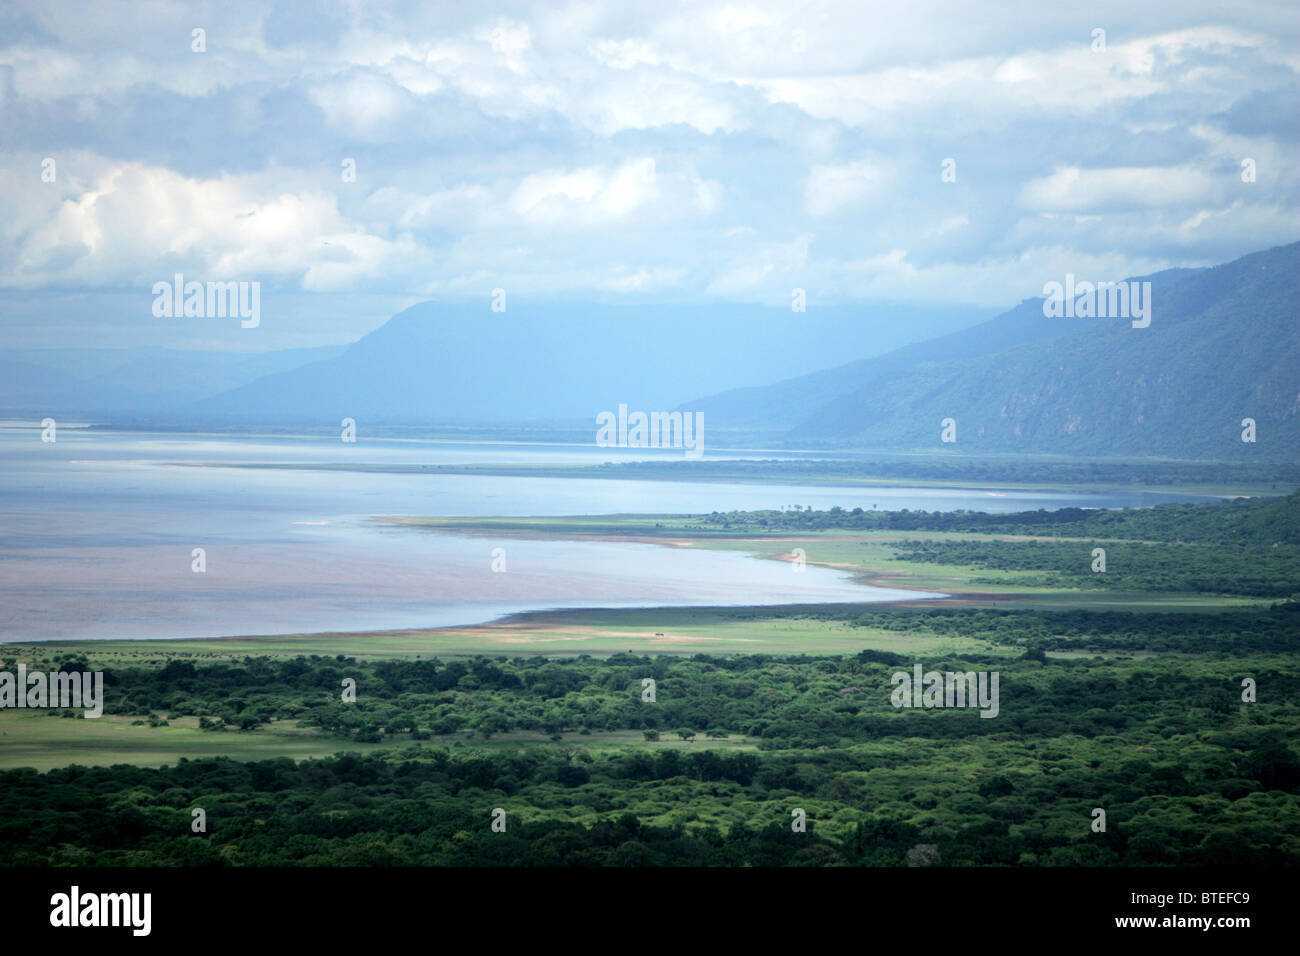 Lake Manyara landscape showing the lake and the side of the African Rift Valley Stock Photo